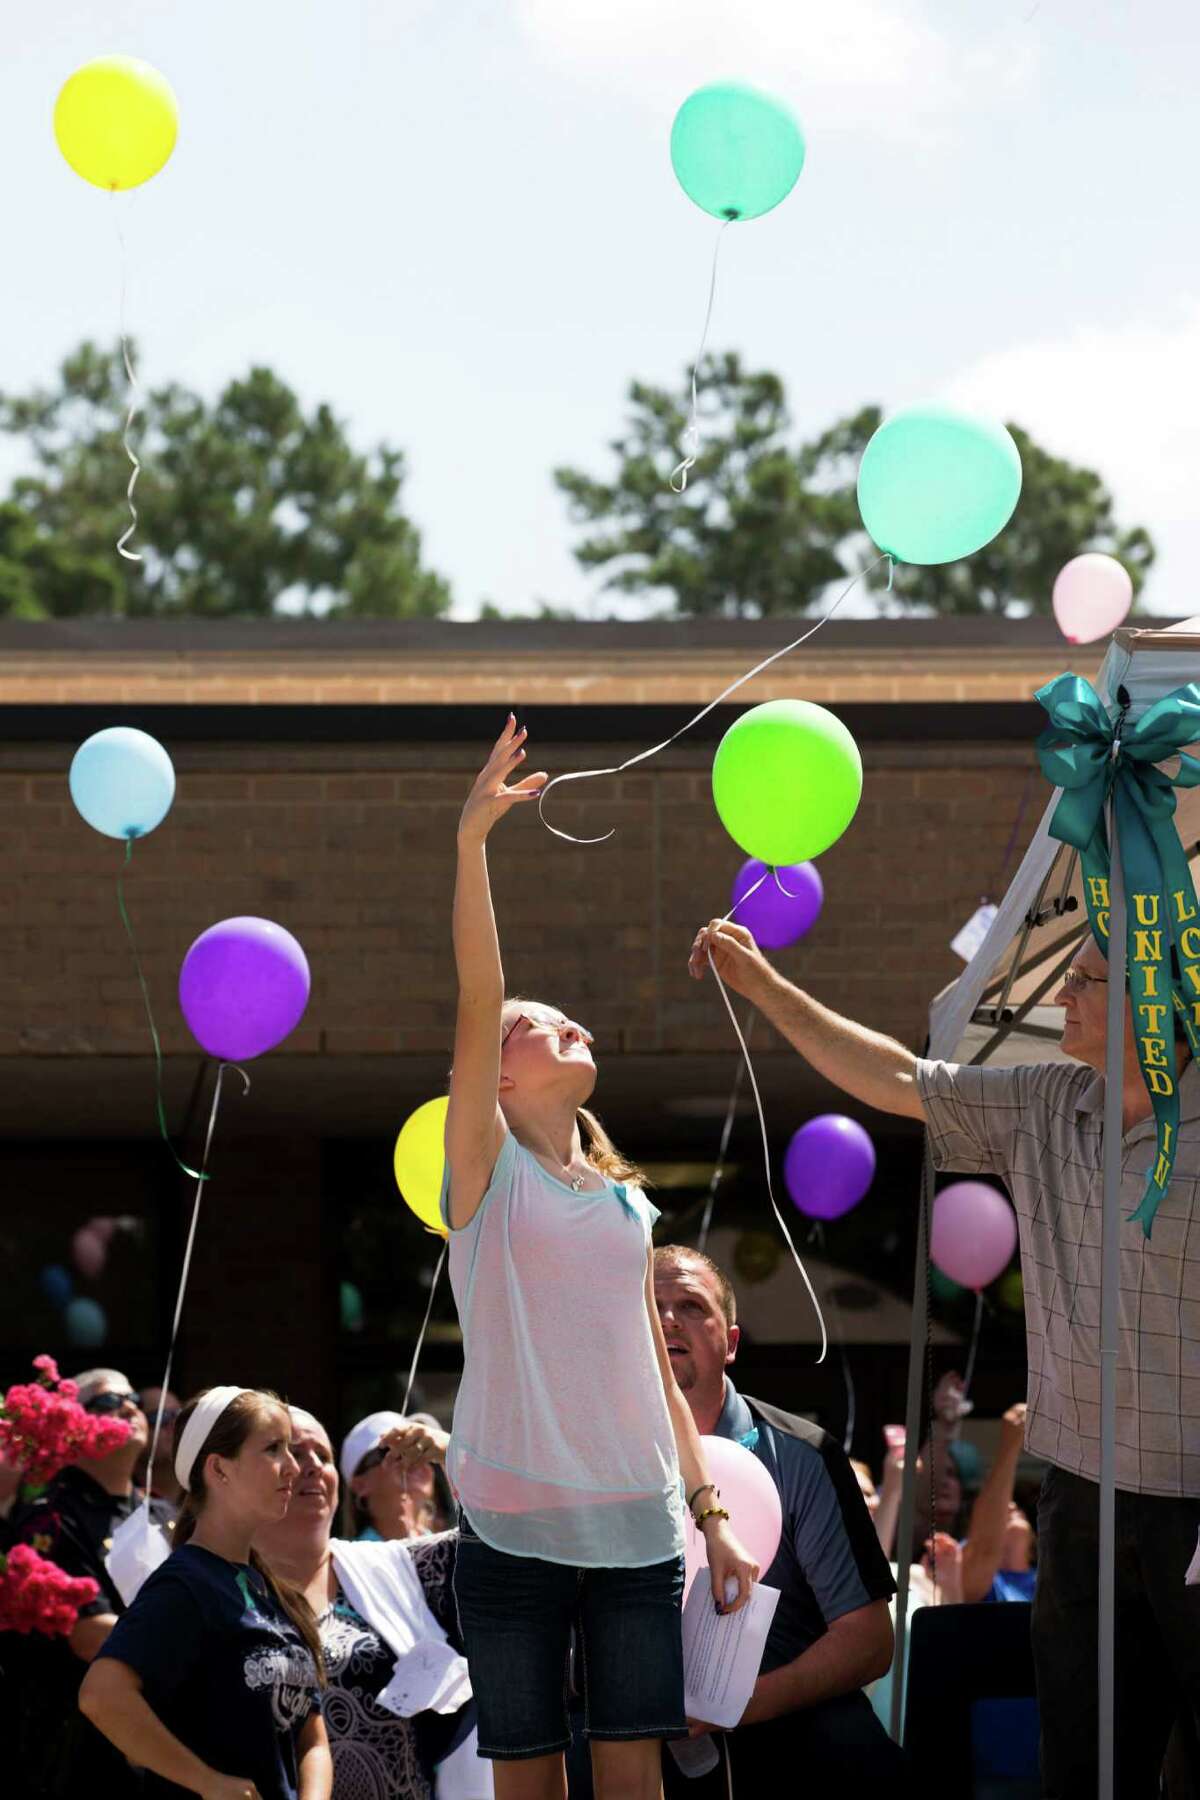 Cassidy Stay, lone survivor of the mass shooting of her parents and siblings, lets a balloon go during a community memorial ﻿for the Stay family﻿.